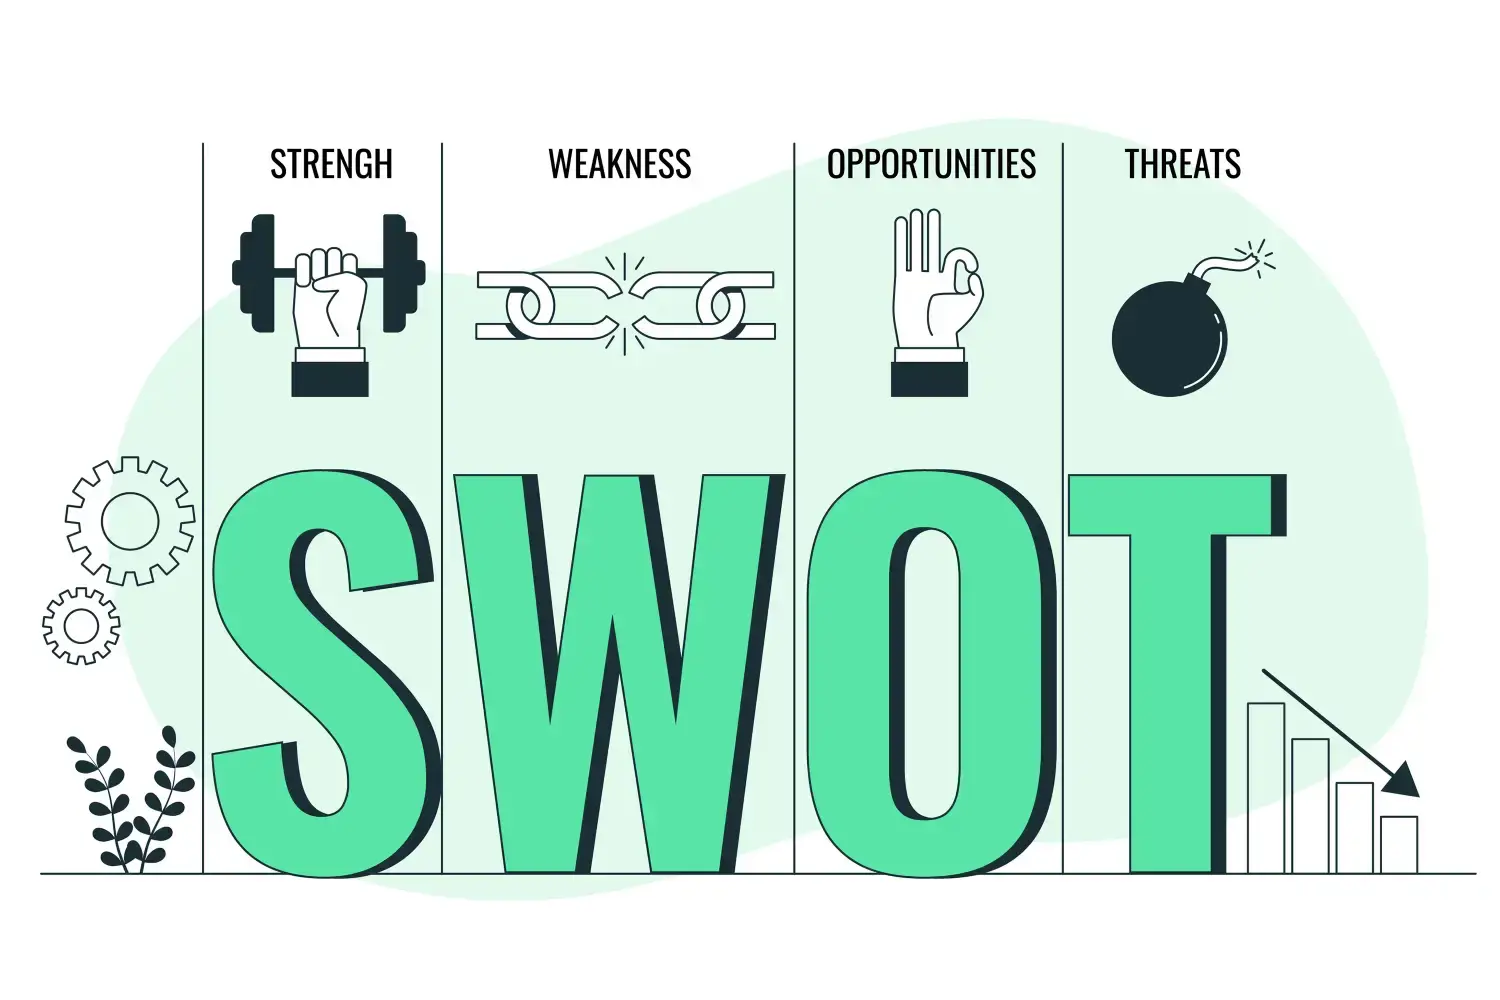 Department SWOT Analysis & Project Management Planning